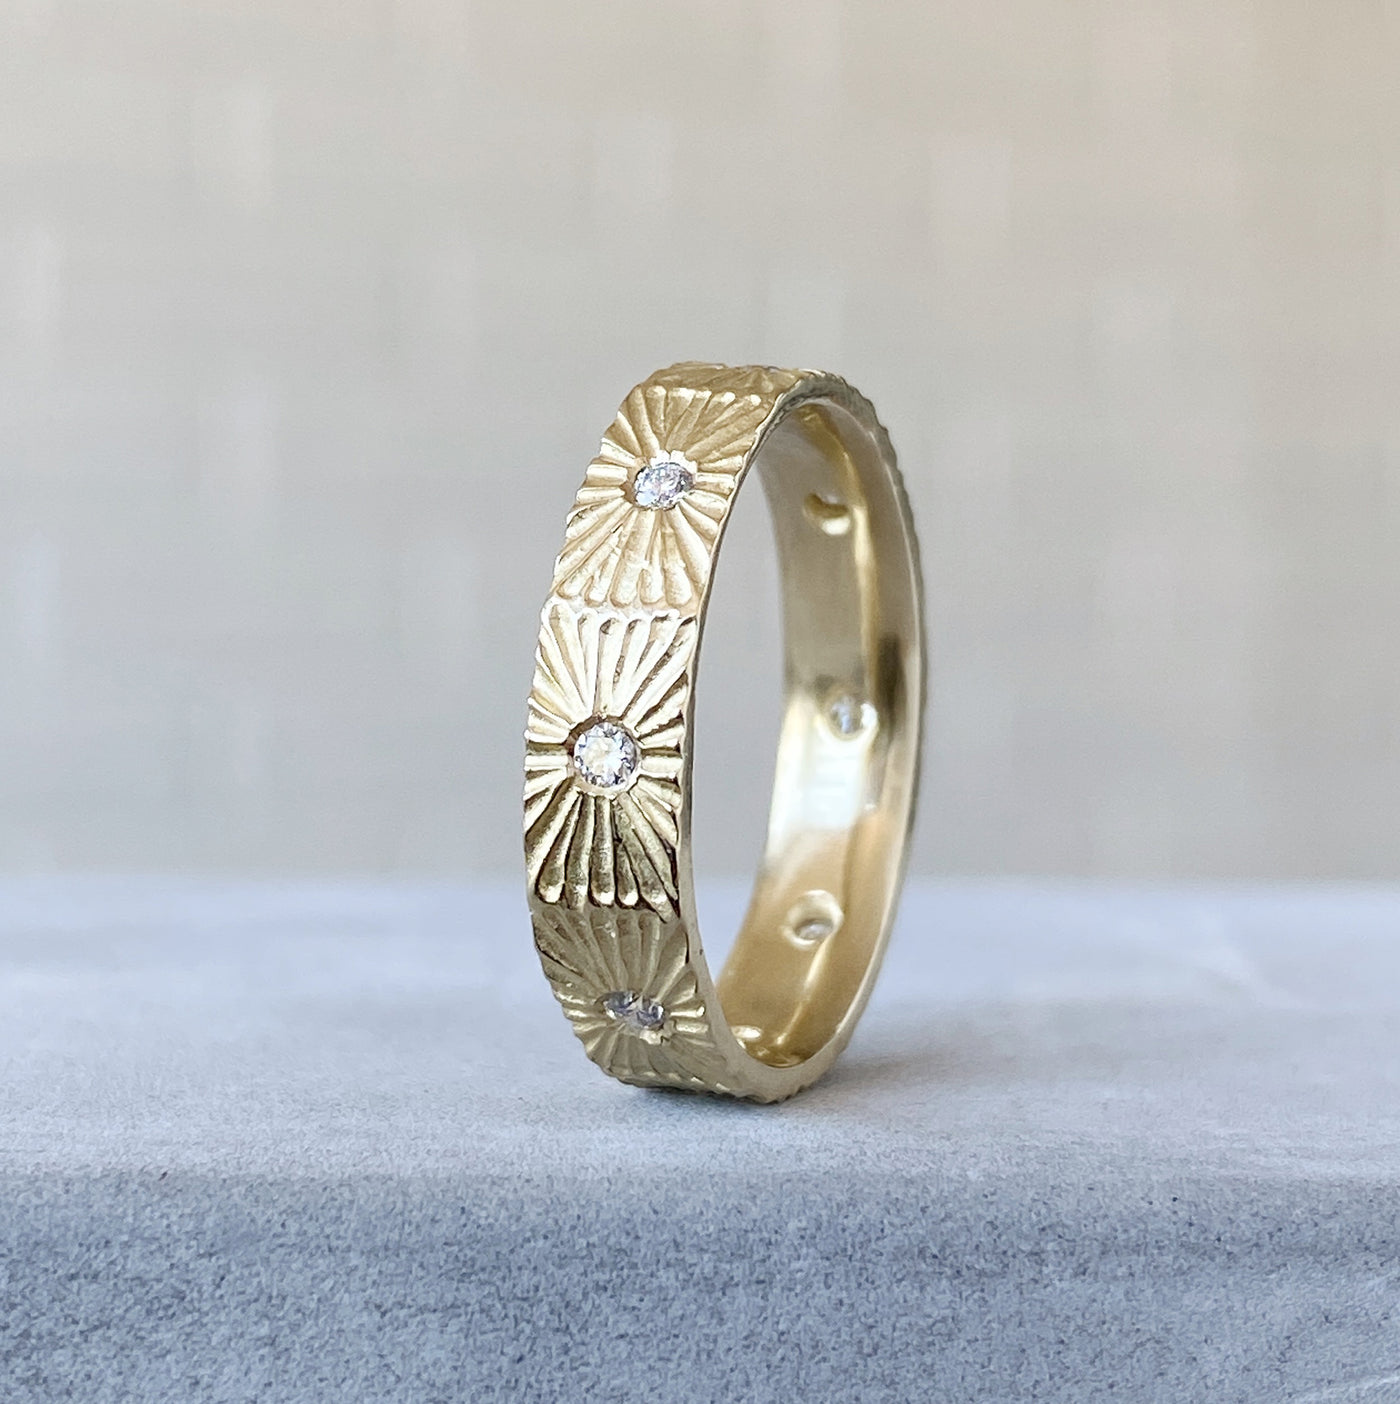 Nova sunburst eternity band with 8 flush set diamonds and carved texture around the outside in 14k yellow gold on concrete